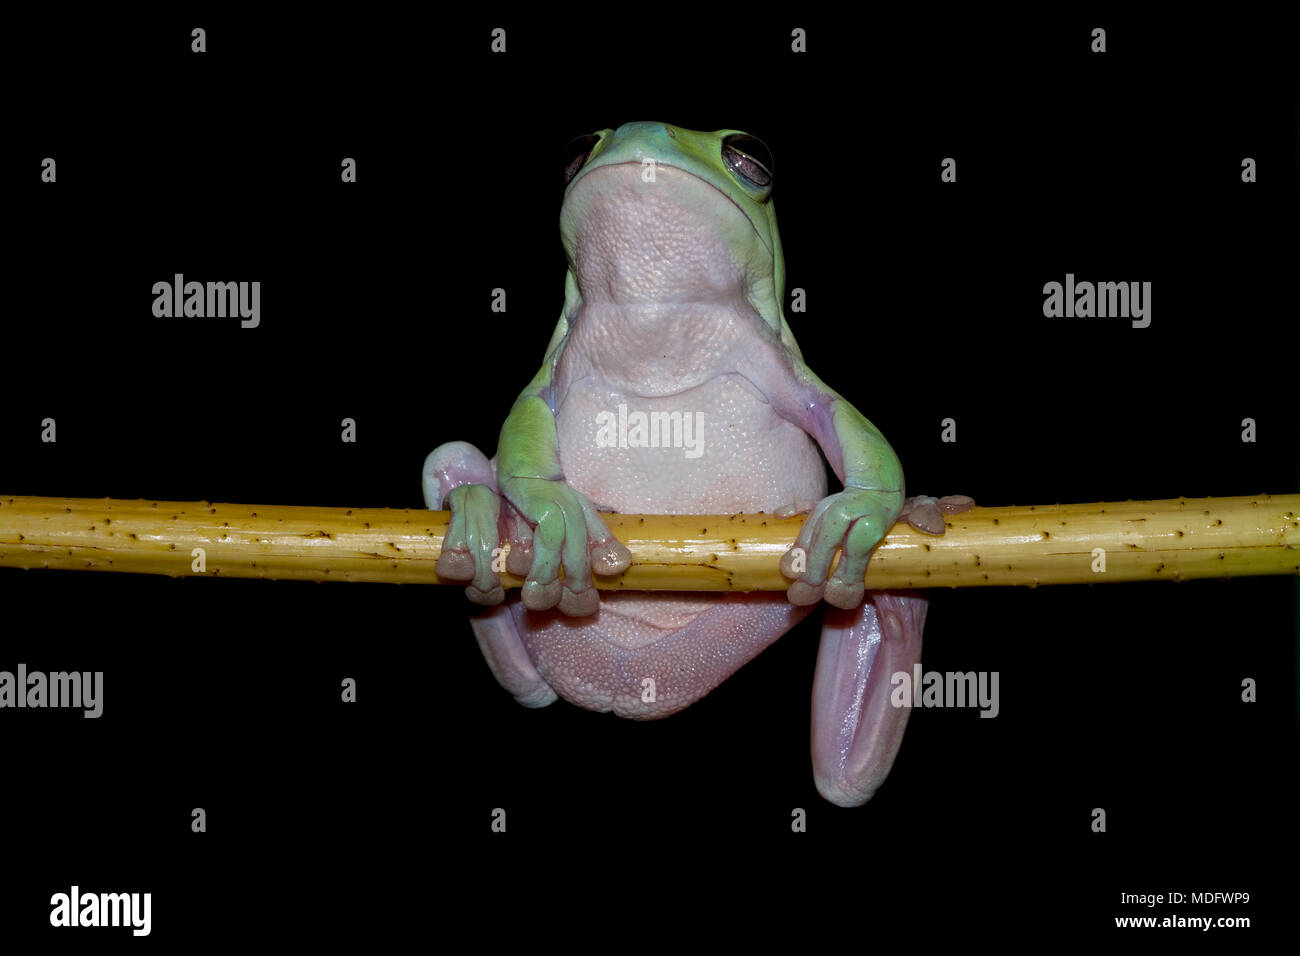 Dumpy frog on a branch Stock Photo